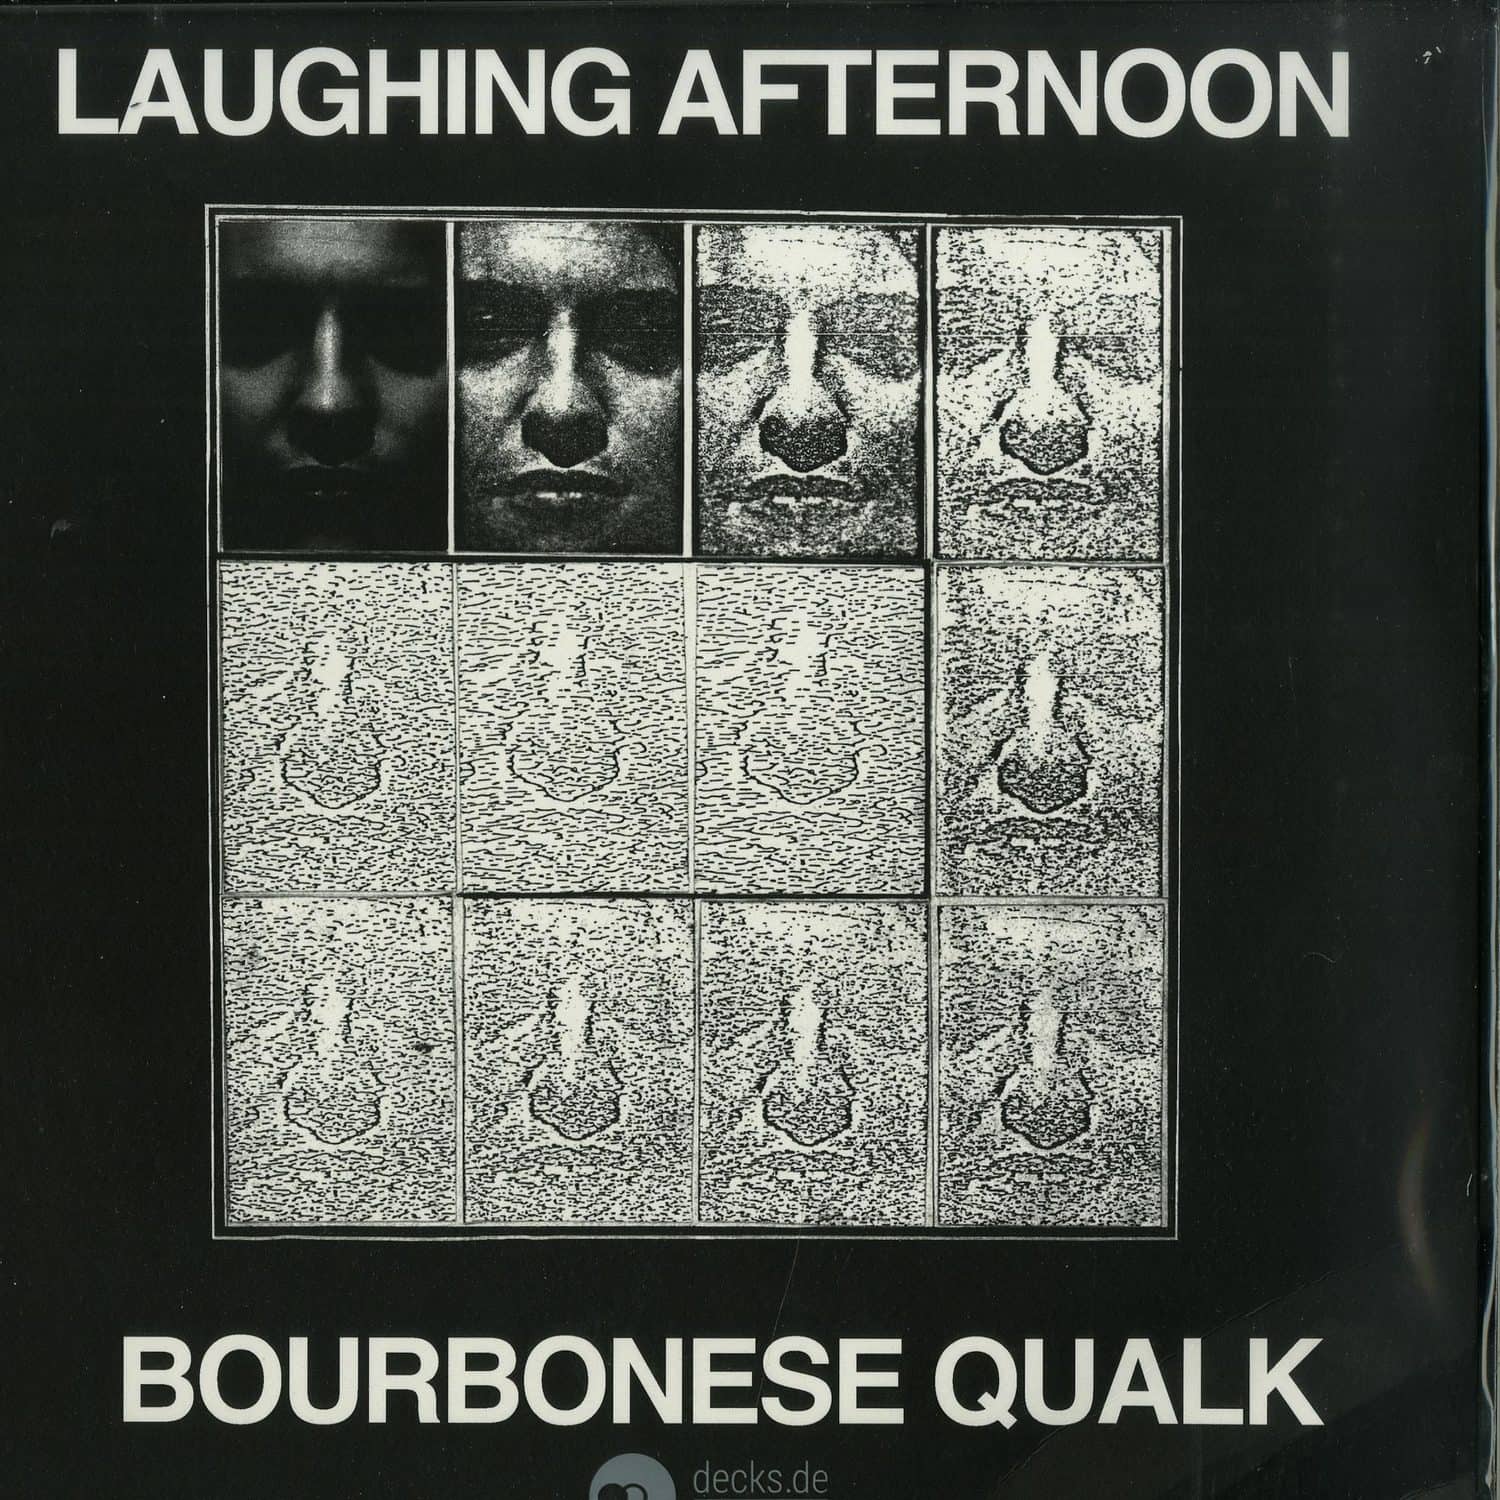 Bourbonese Qualk - LAUGHING AFTERNOON 